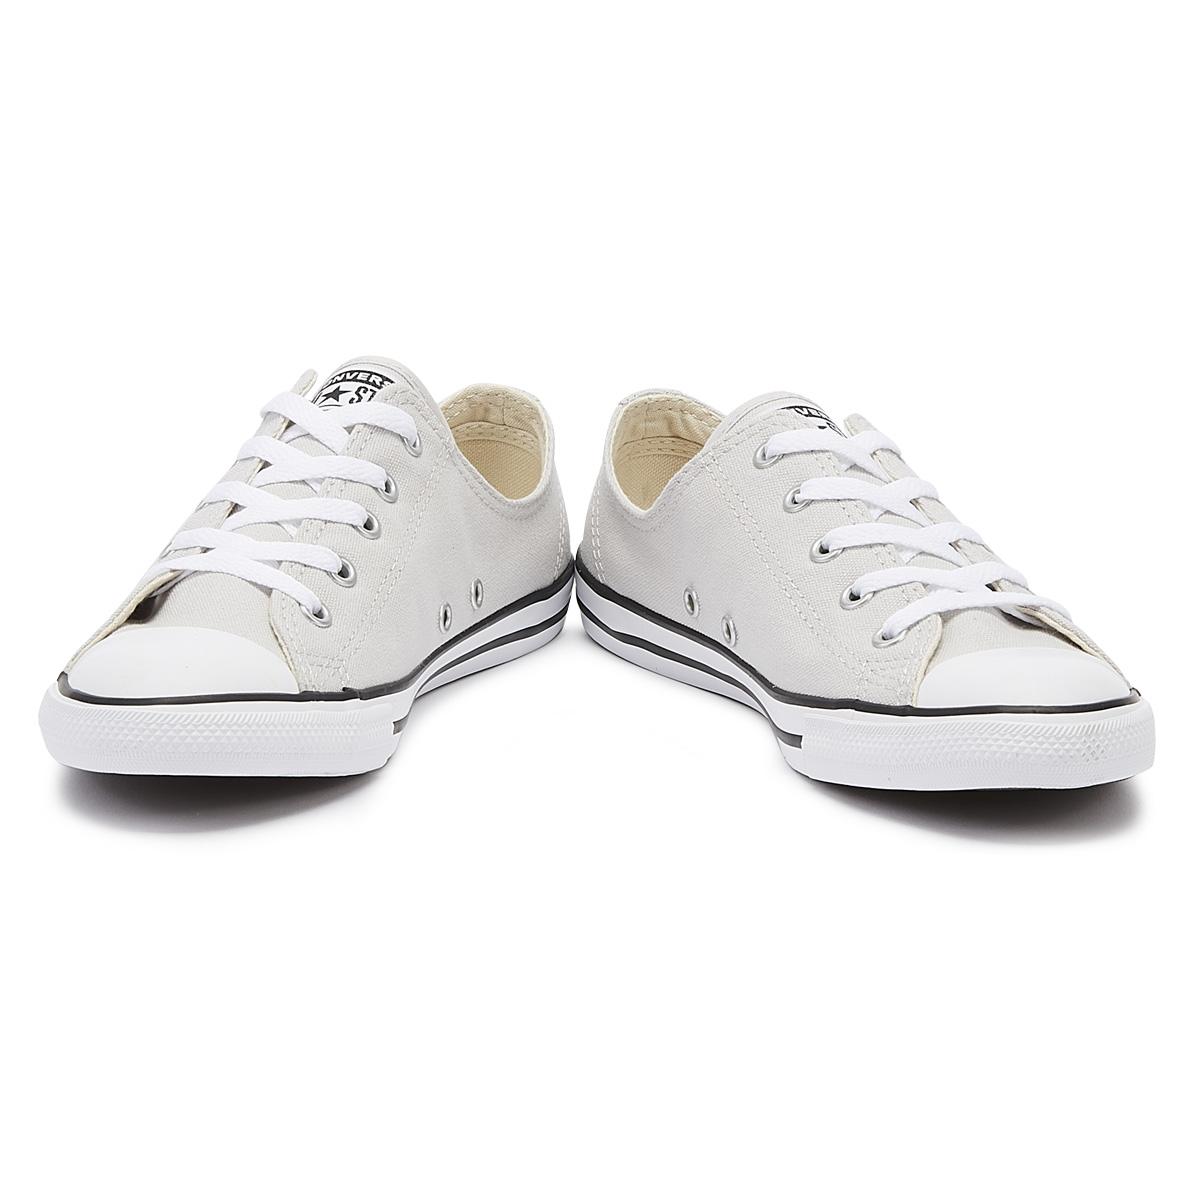 Converse Dainty Mouse Store, 54% OFF | www.smokymountains.org